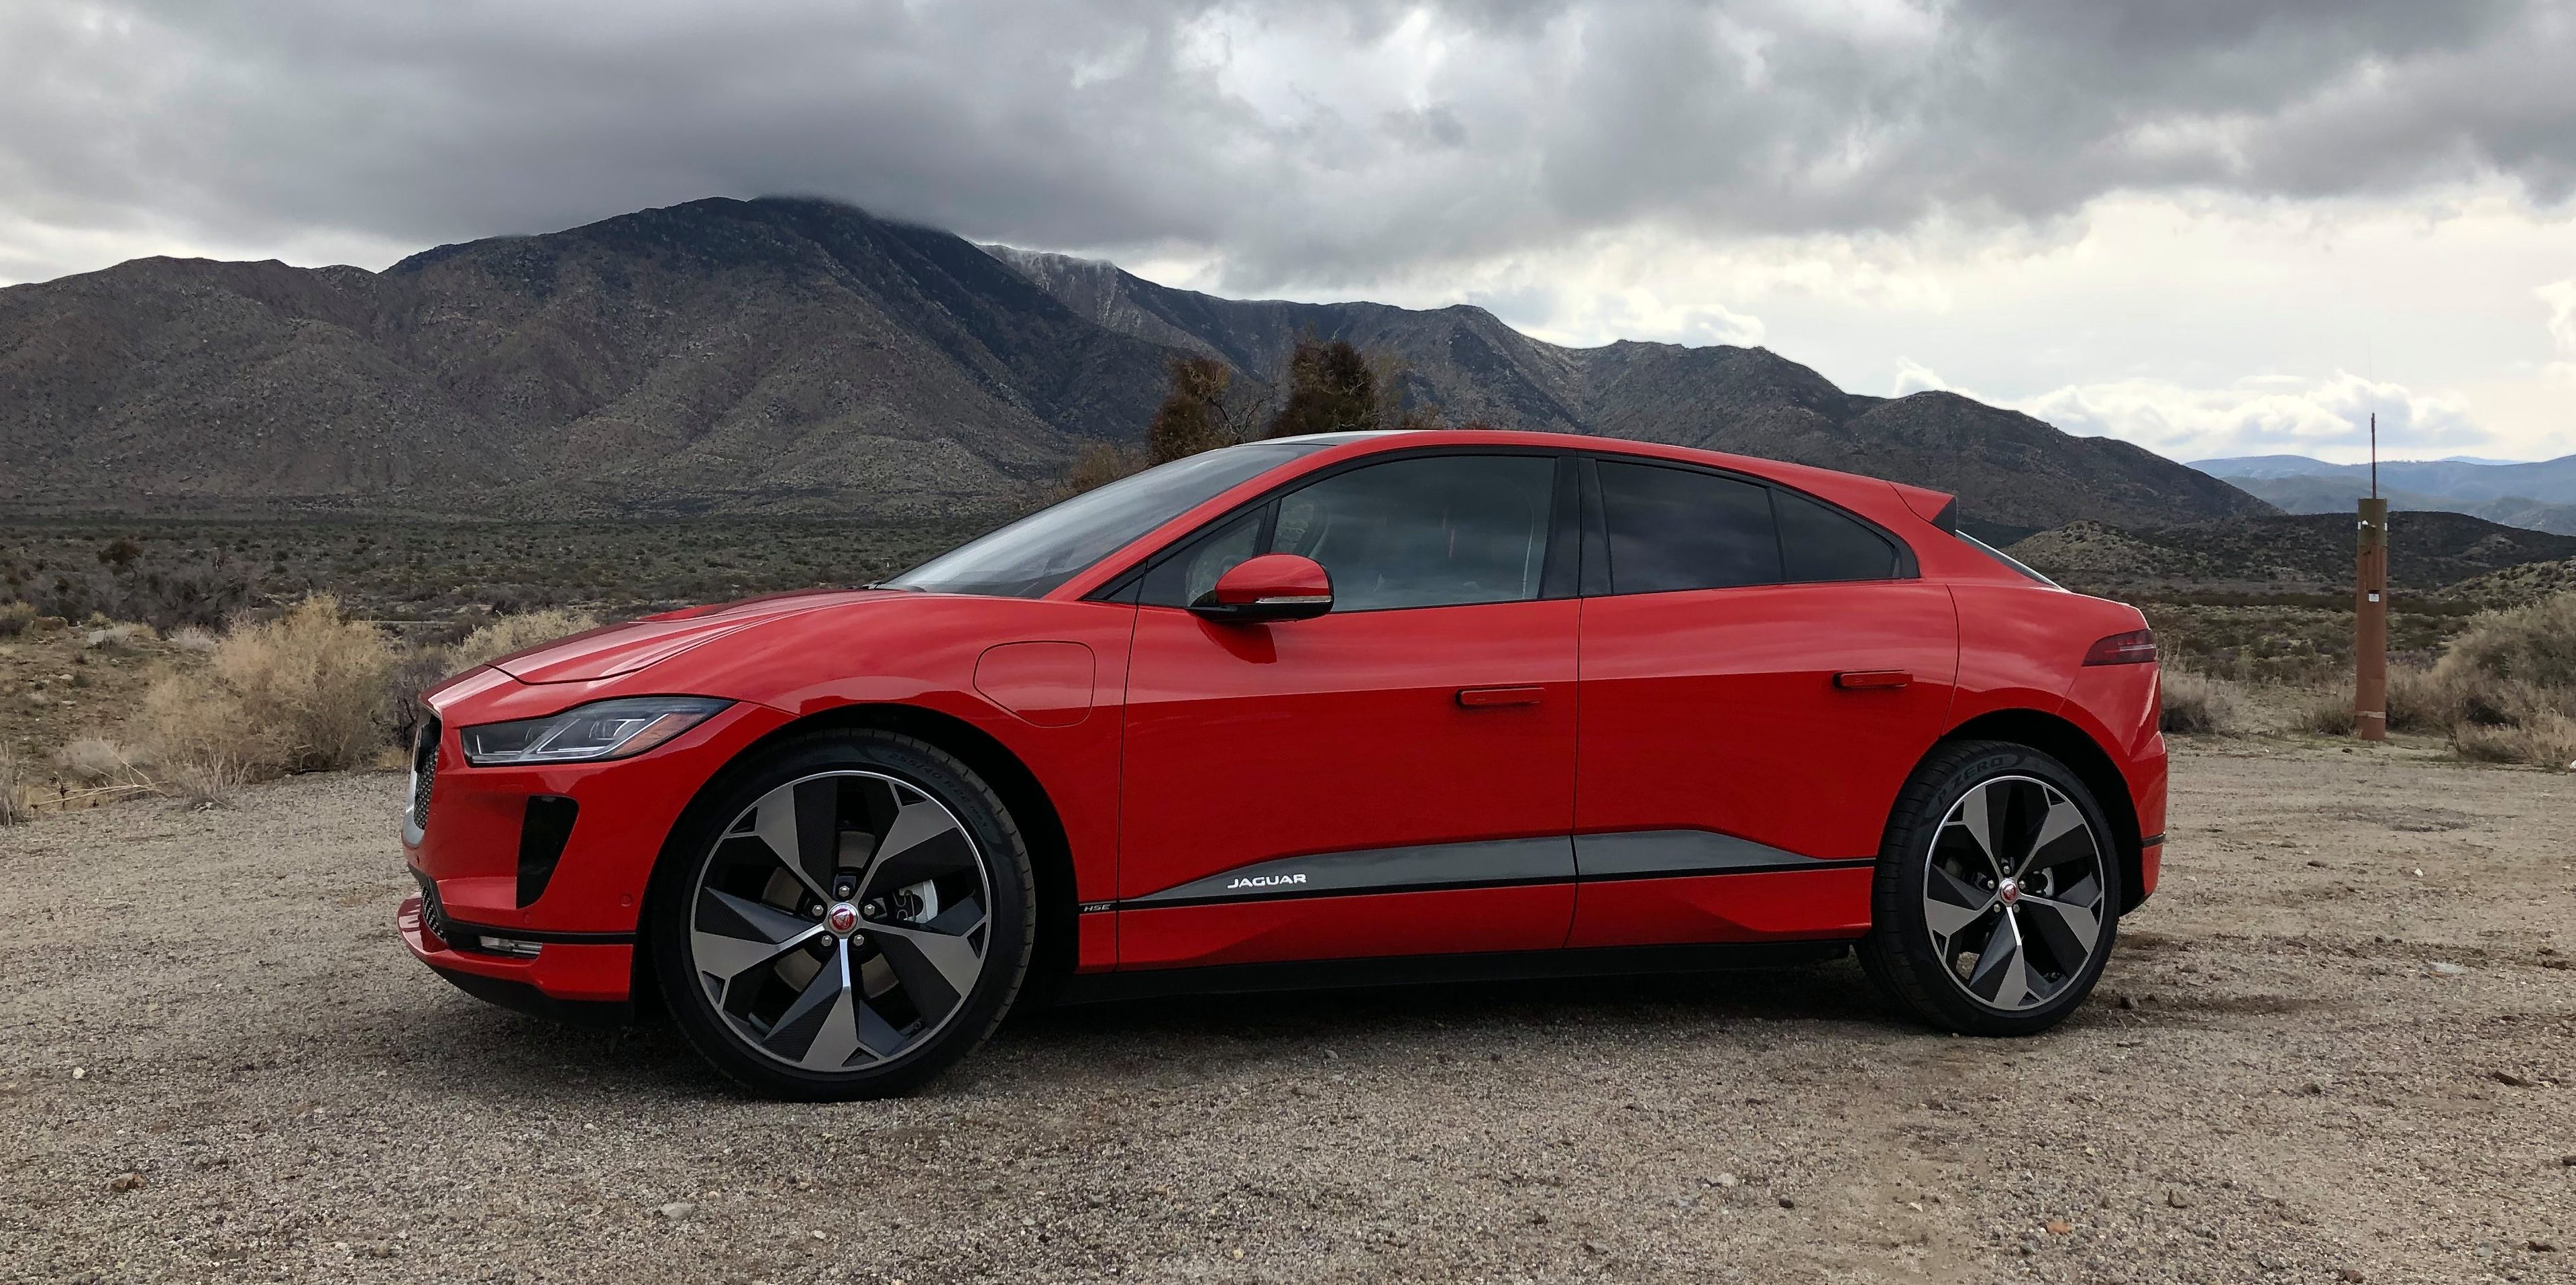 Electrek Review Jaguar I-PACE: a stunning electric vehicle with some issues